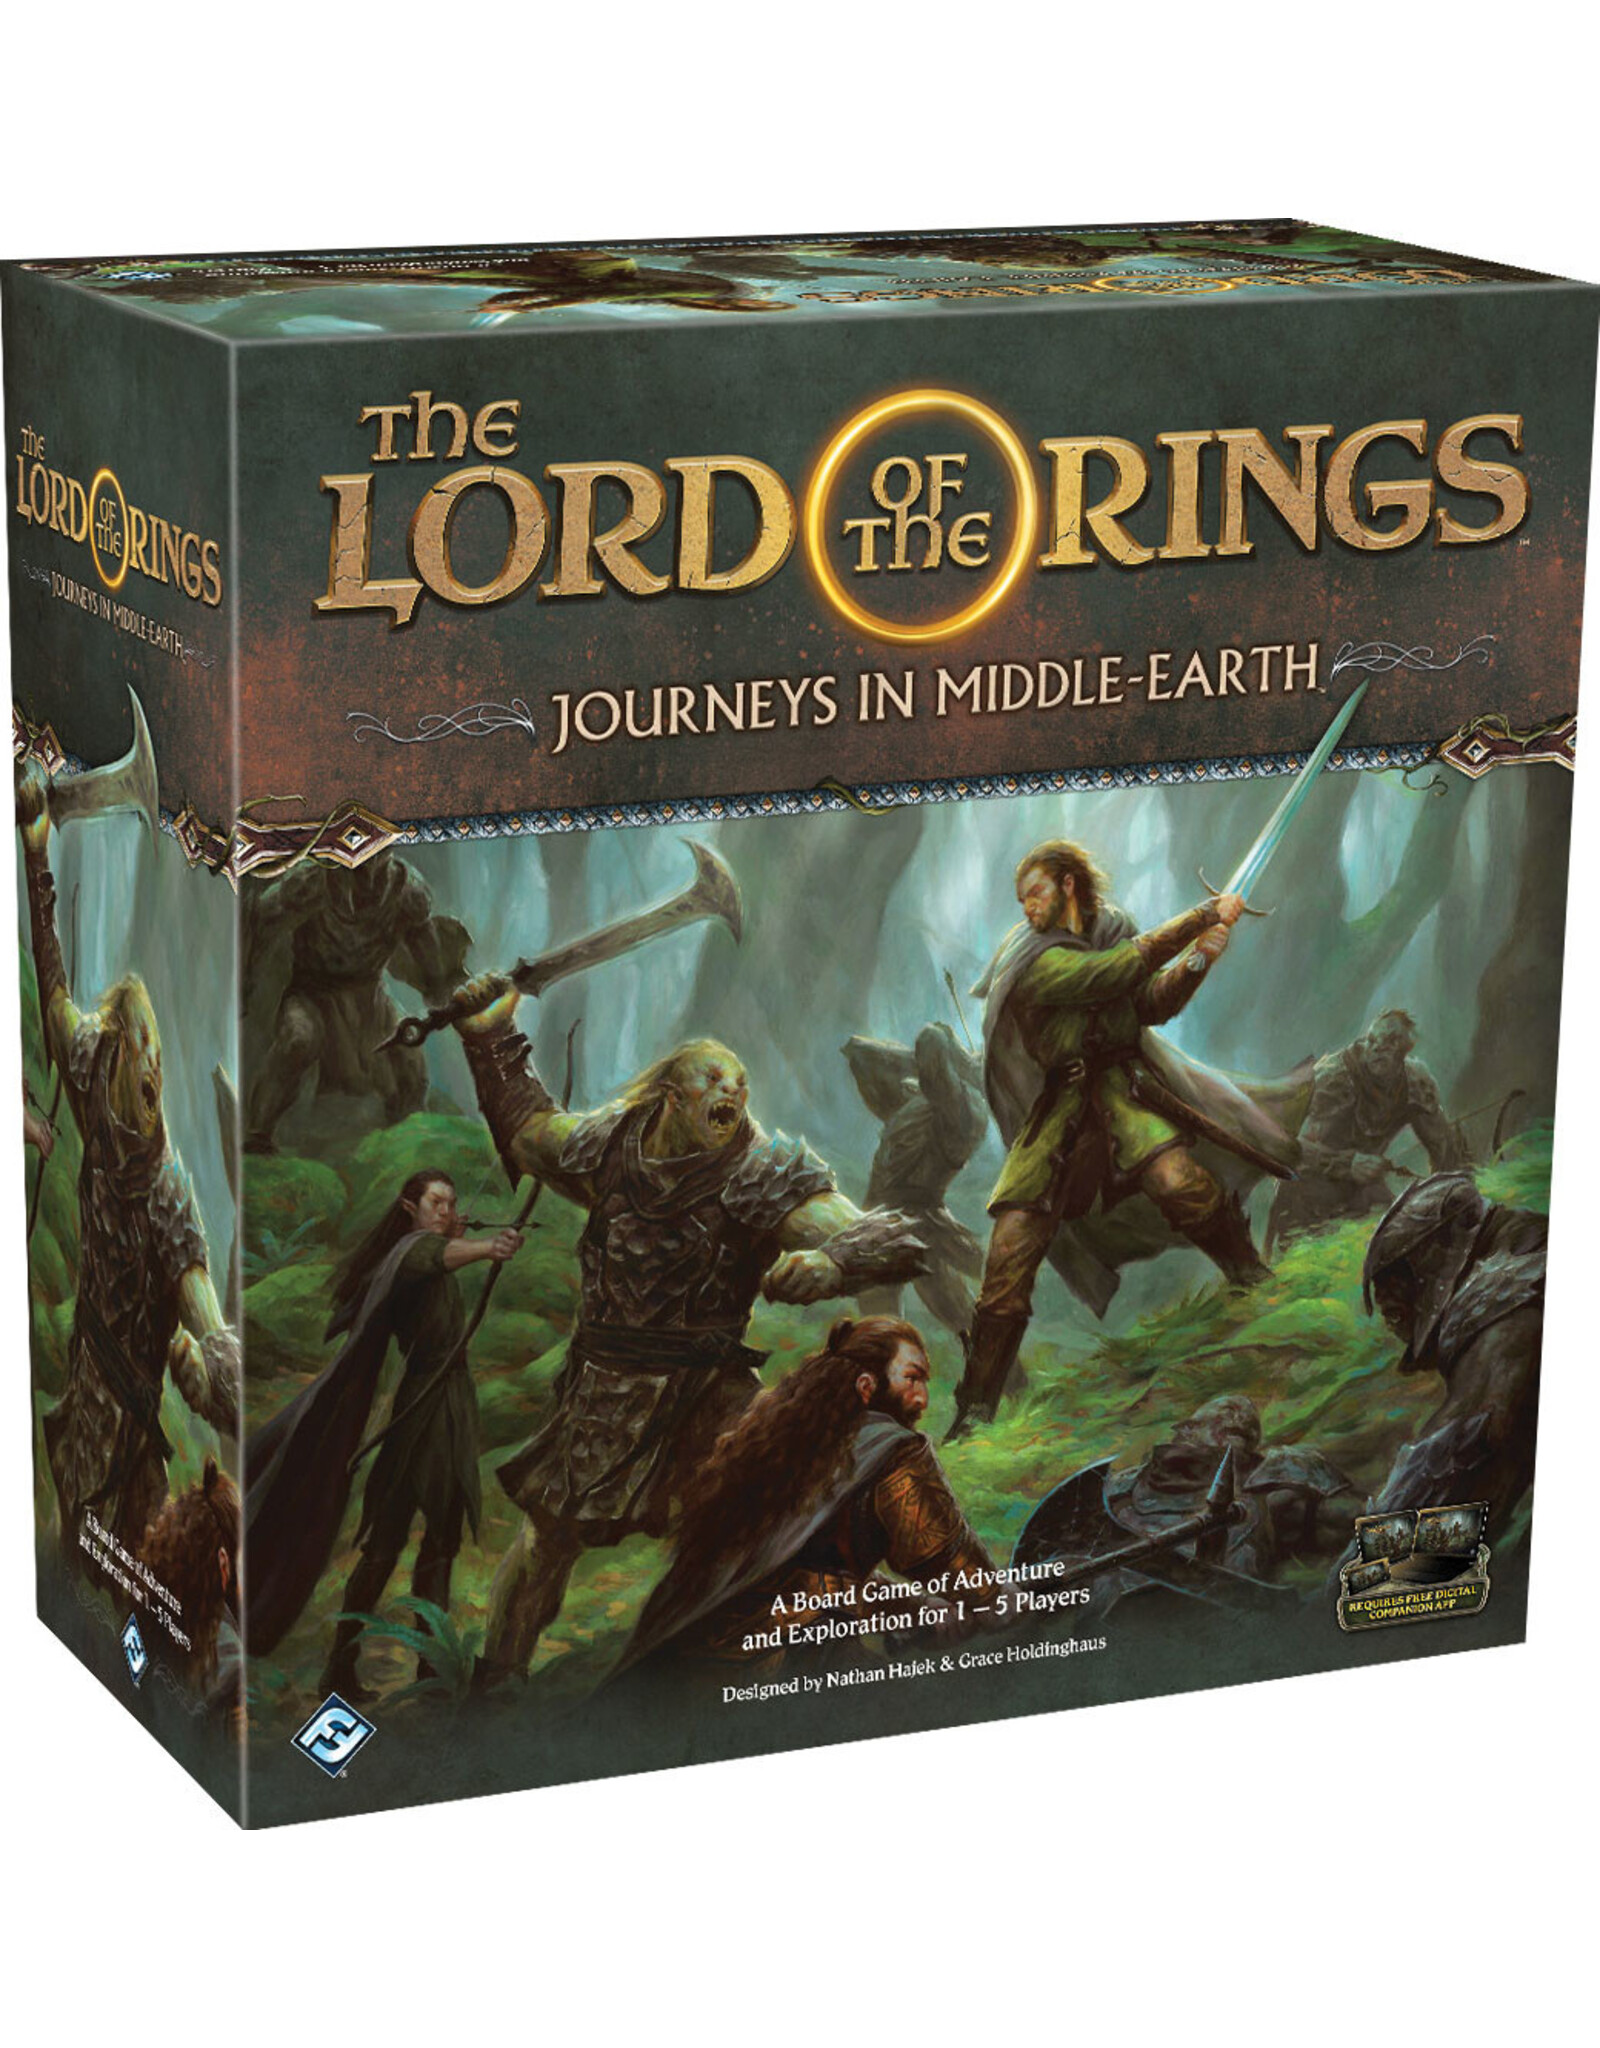 Asmodee: Top 40 The Lord of the Rings: Journeys in Middle-earth